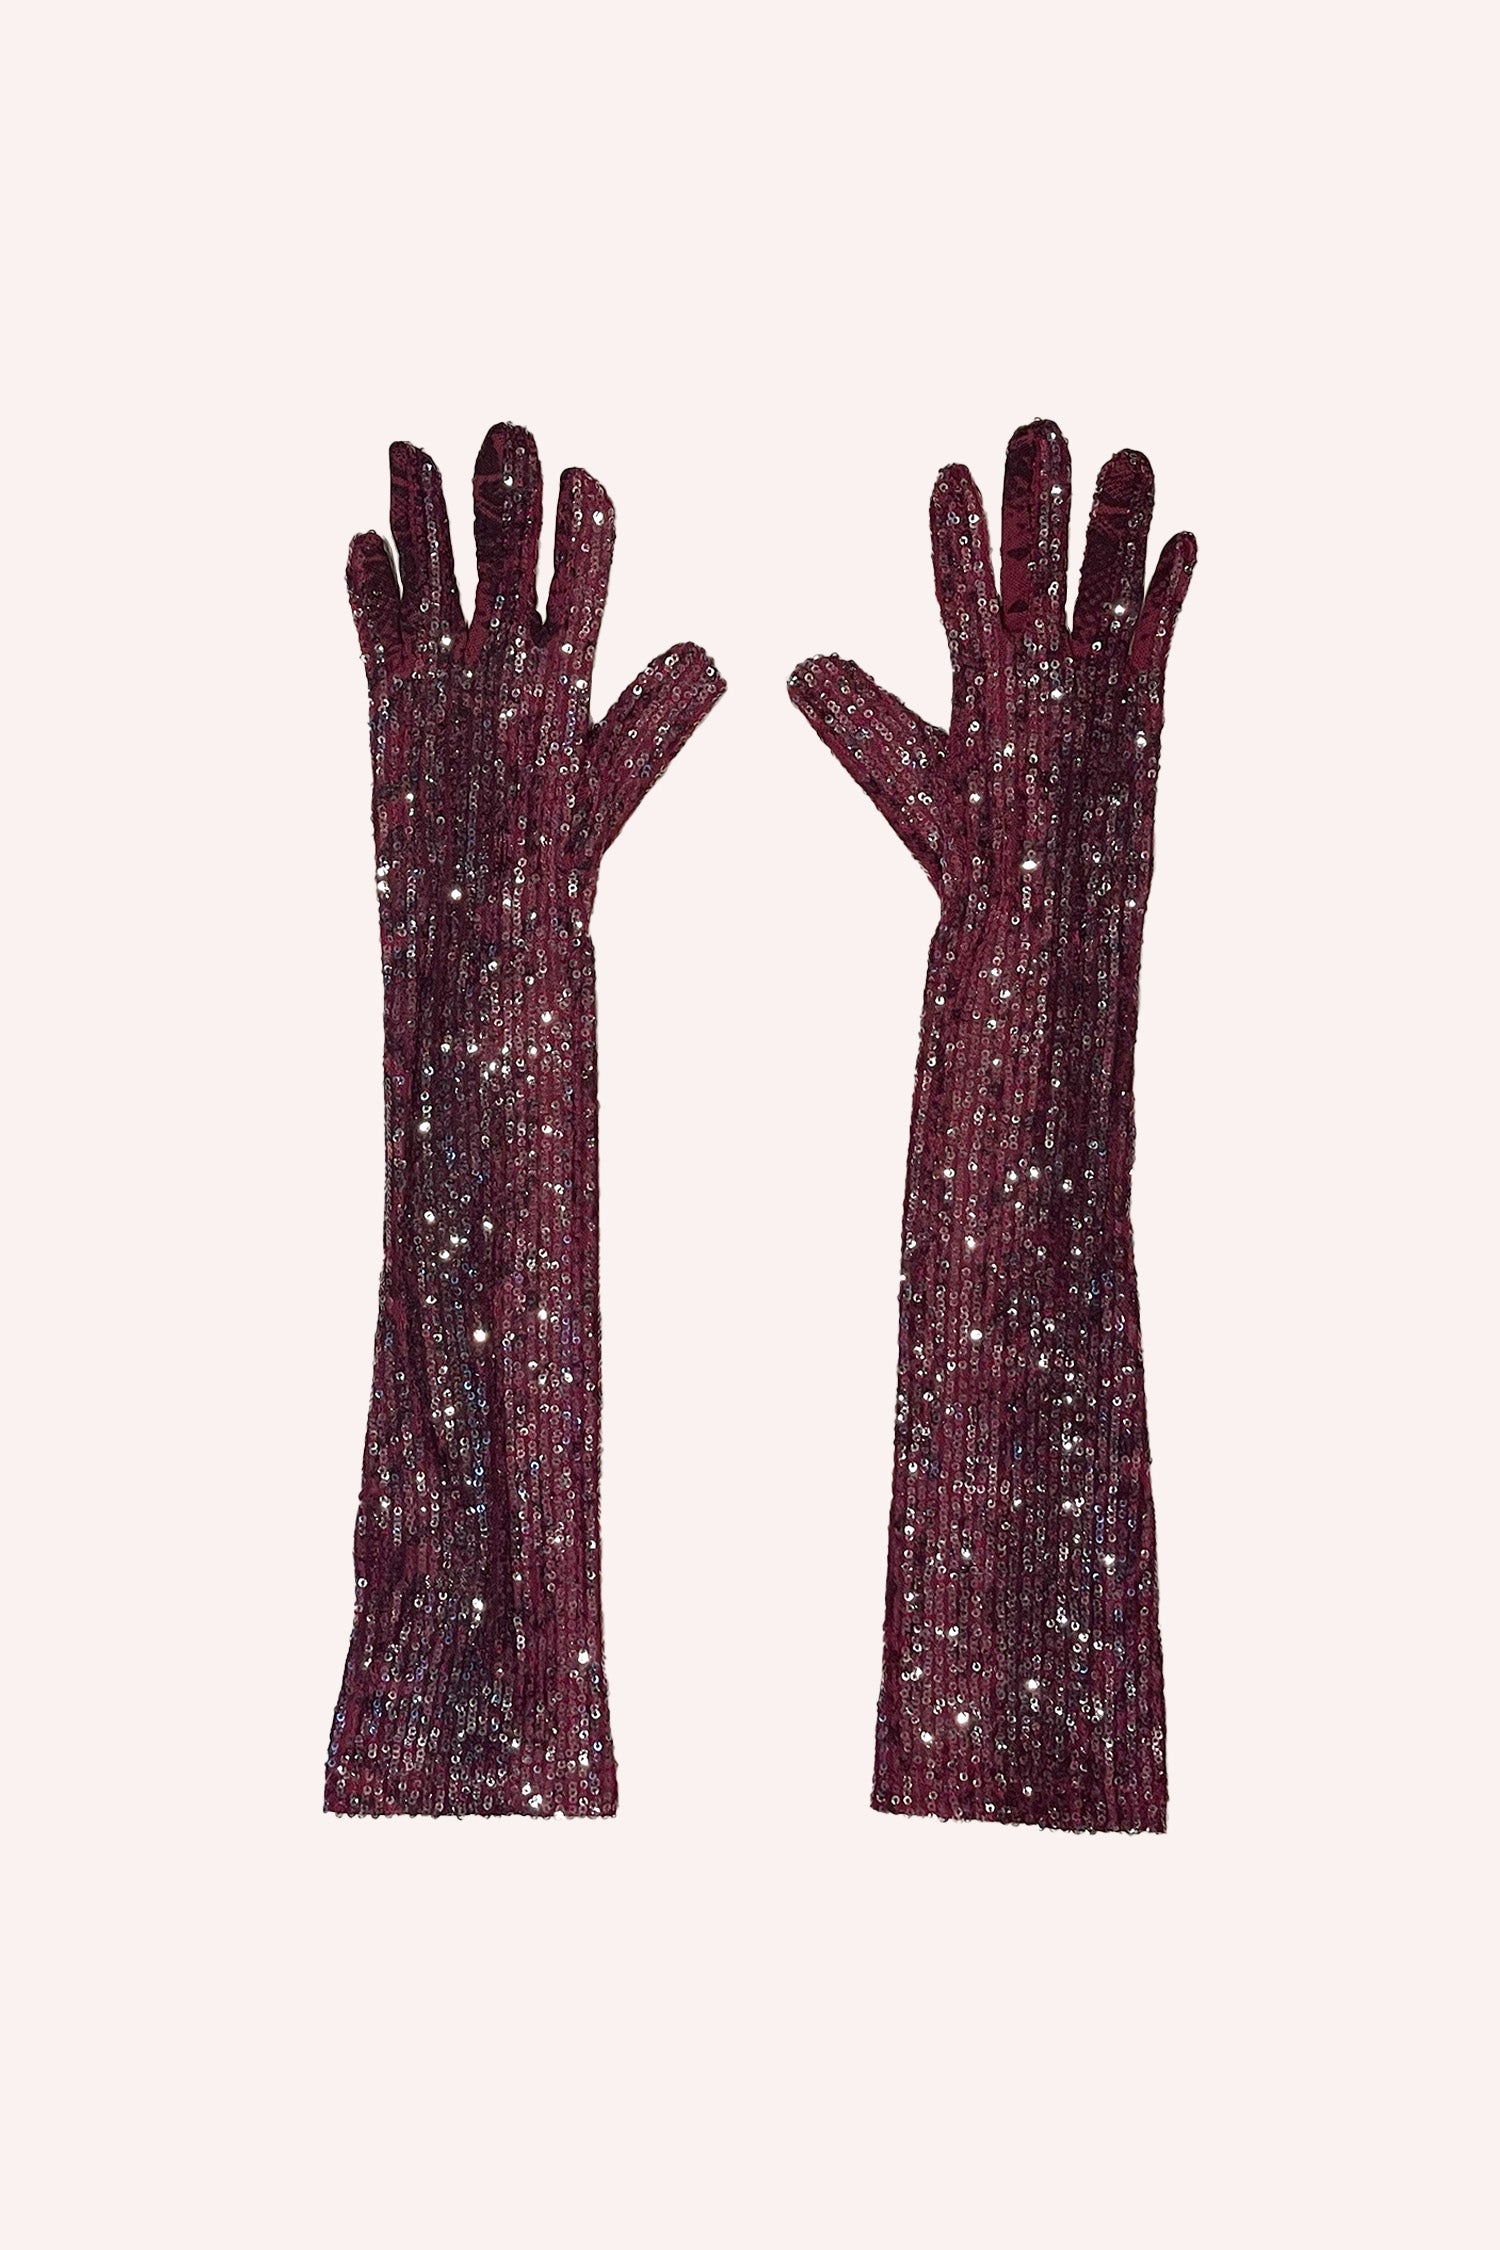 The Snakeskin Sequin Gloves in Ruby are a pair of shiny, elbow-length gloves in a ruby red color